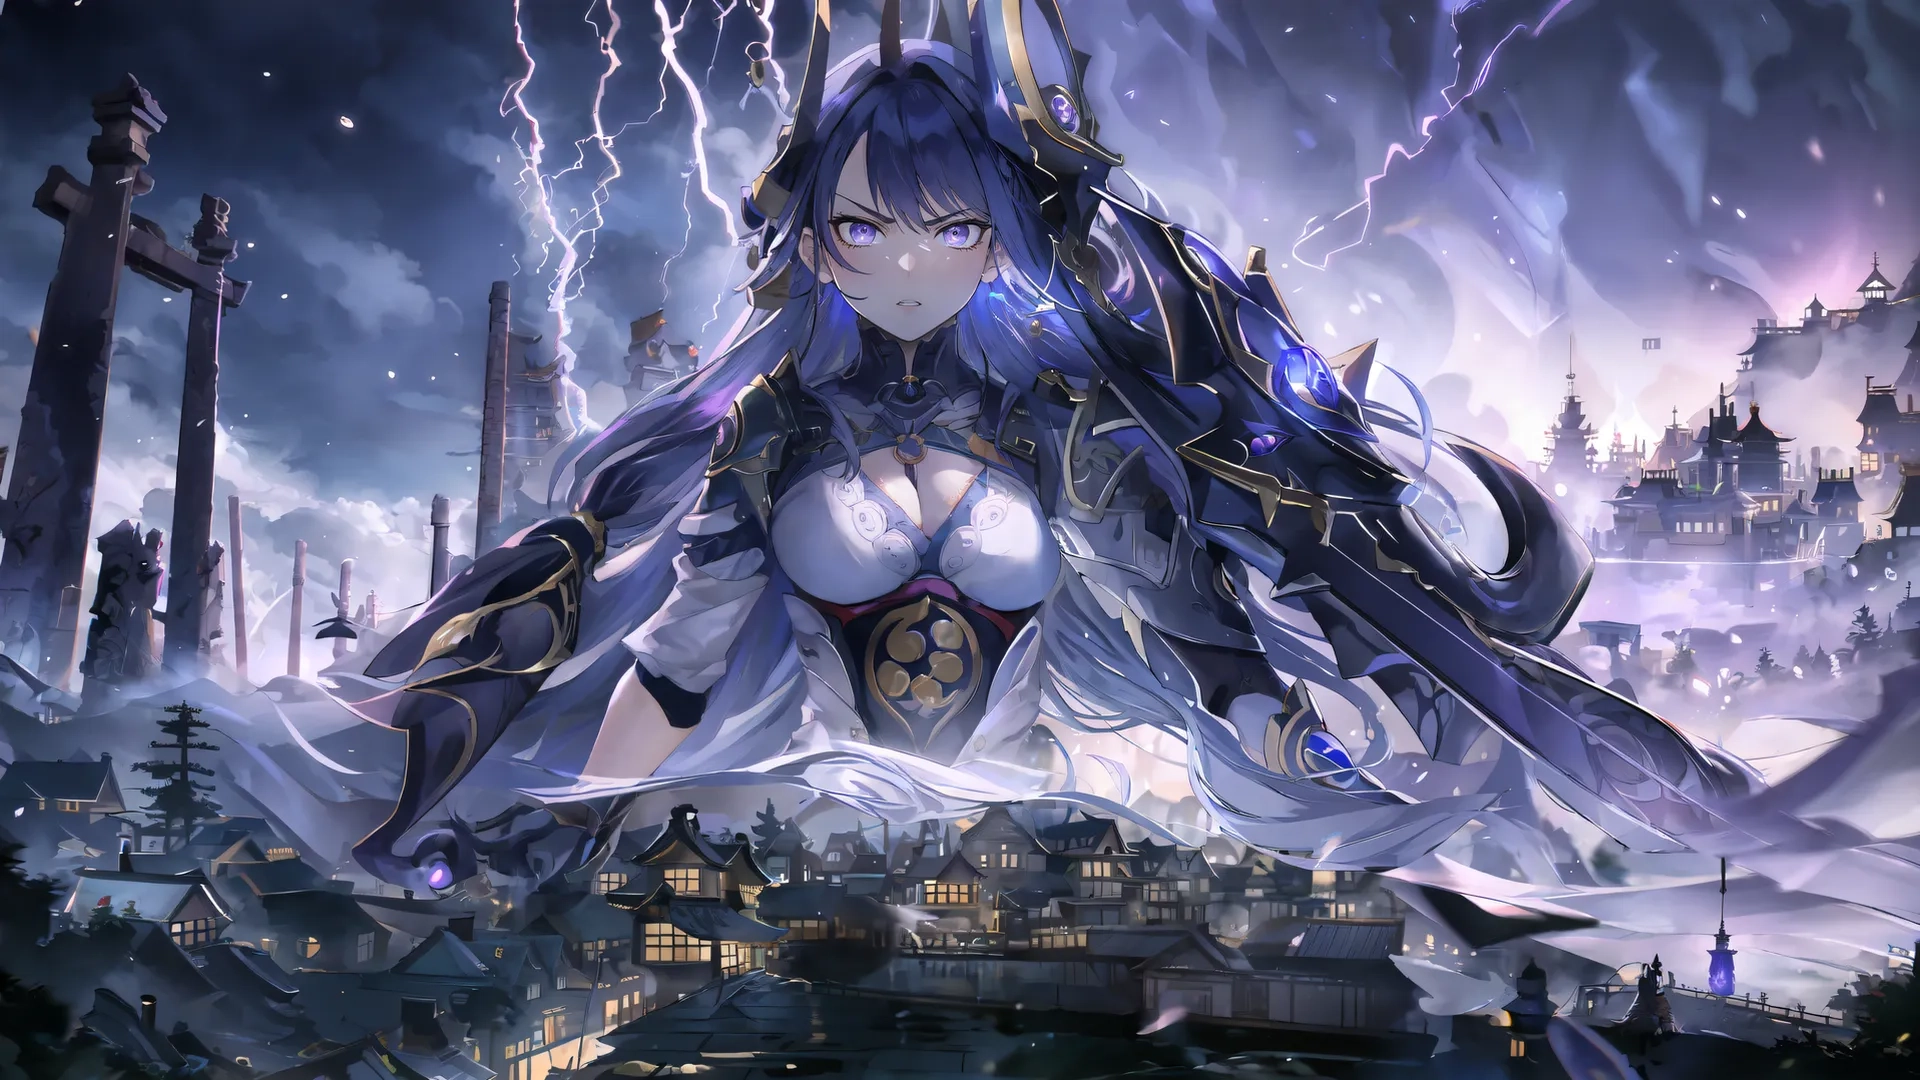 the image shows lightning over a city and a girl with blue hair wearing dark clothing and huge wings is flying at her waist, overlooking a mountain
